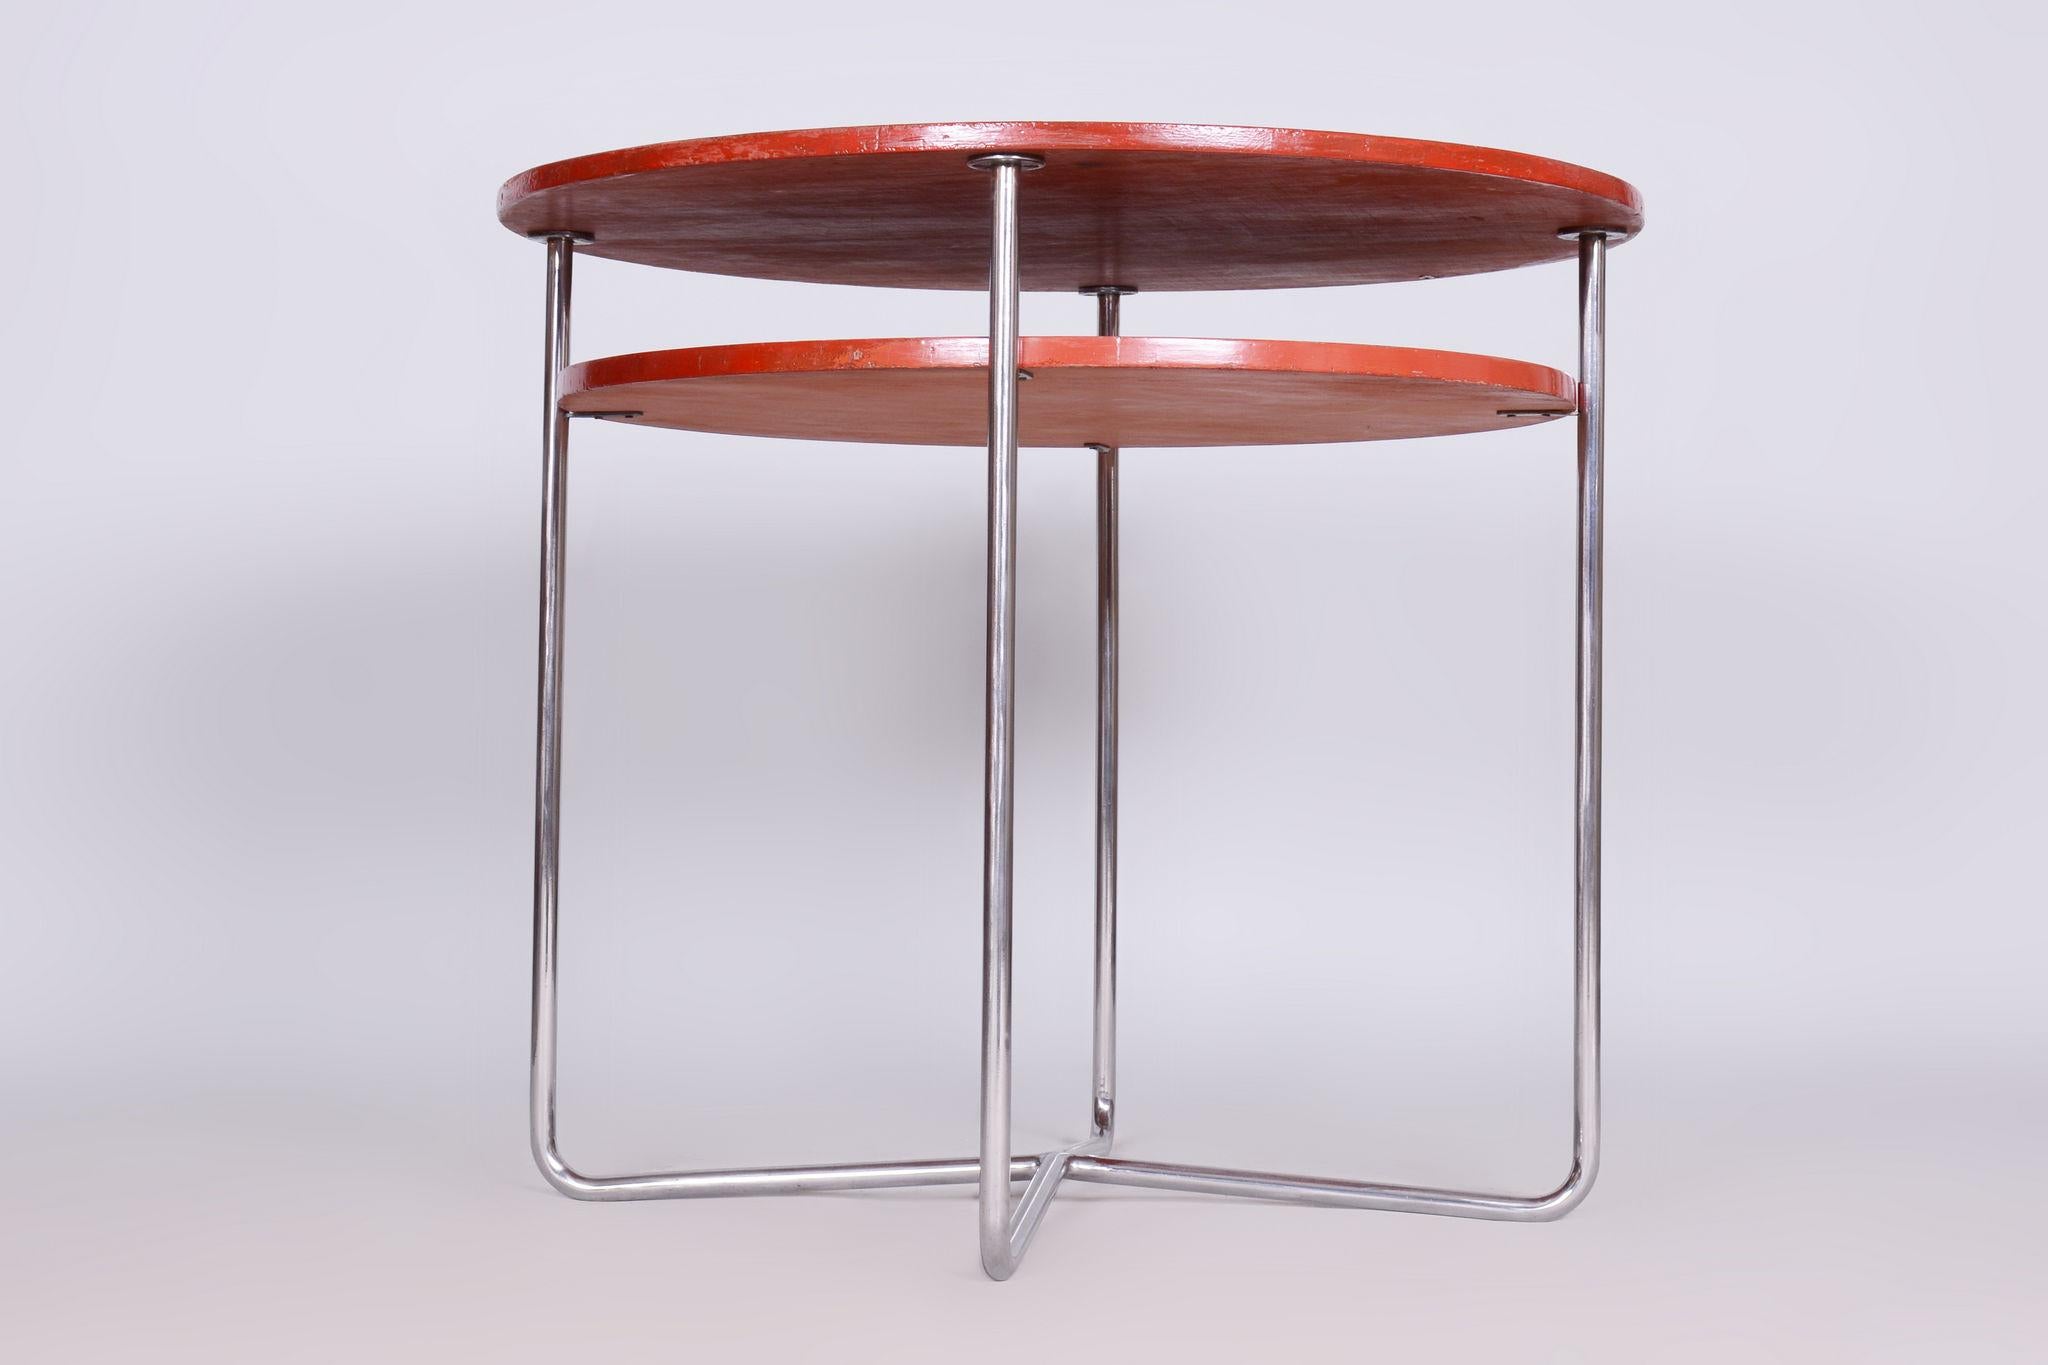 Restored Bauhaus Small Round Table.

Period: 1930-1939
Source: Czechia (Czechoslovakia)
Material: Chrome-Plated Steel, Lacquered Wood

Revived paint.
The chrome parts have been cleaned and professionally restored. 

This item features classic